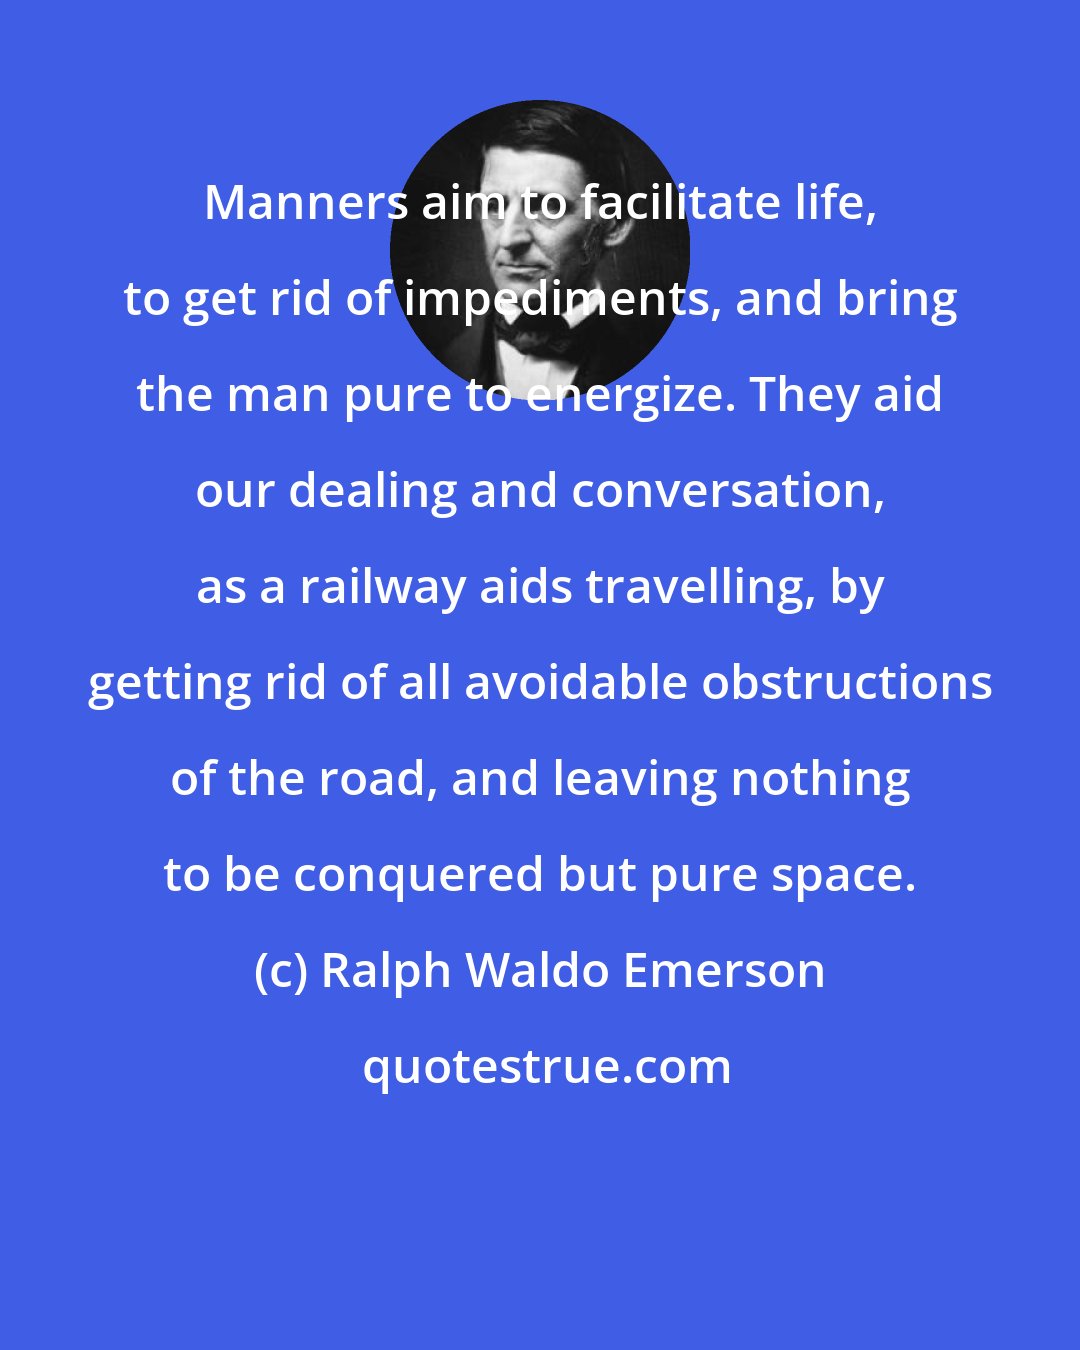 Ralph Waldo Emerson: Manners aim to facilitate life, to get rid of impediments, and bring the man pure to energize. They aid our dealing and conversation, as a railway aids travelling, by getting rid of all avoidable obstructions of the road, and leaving nothing to be conquered but pure space.